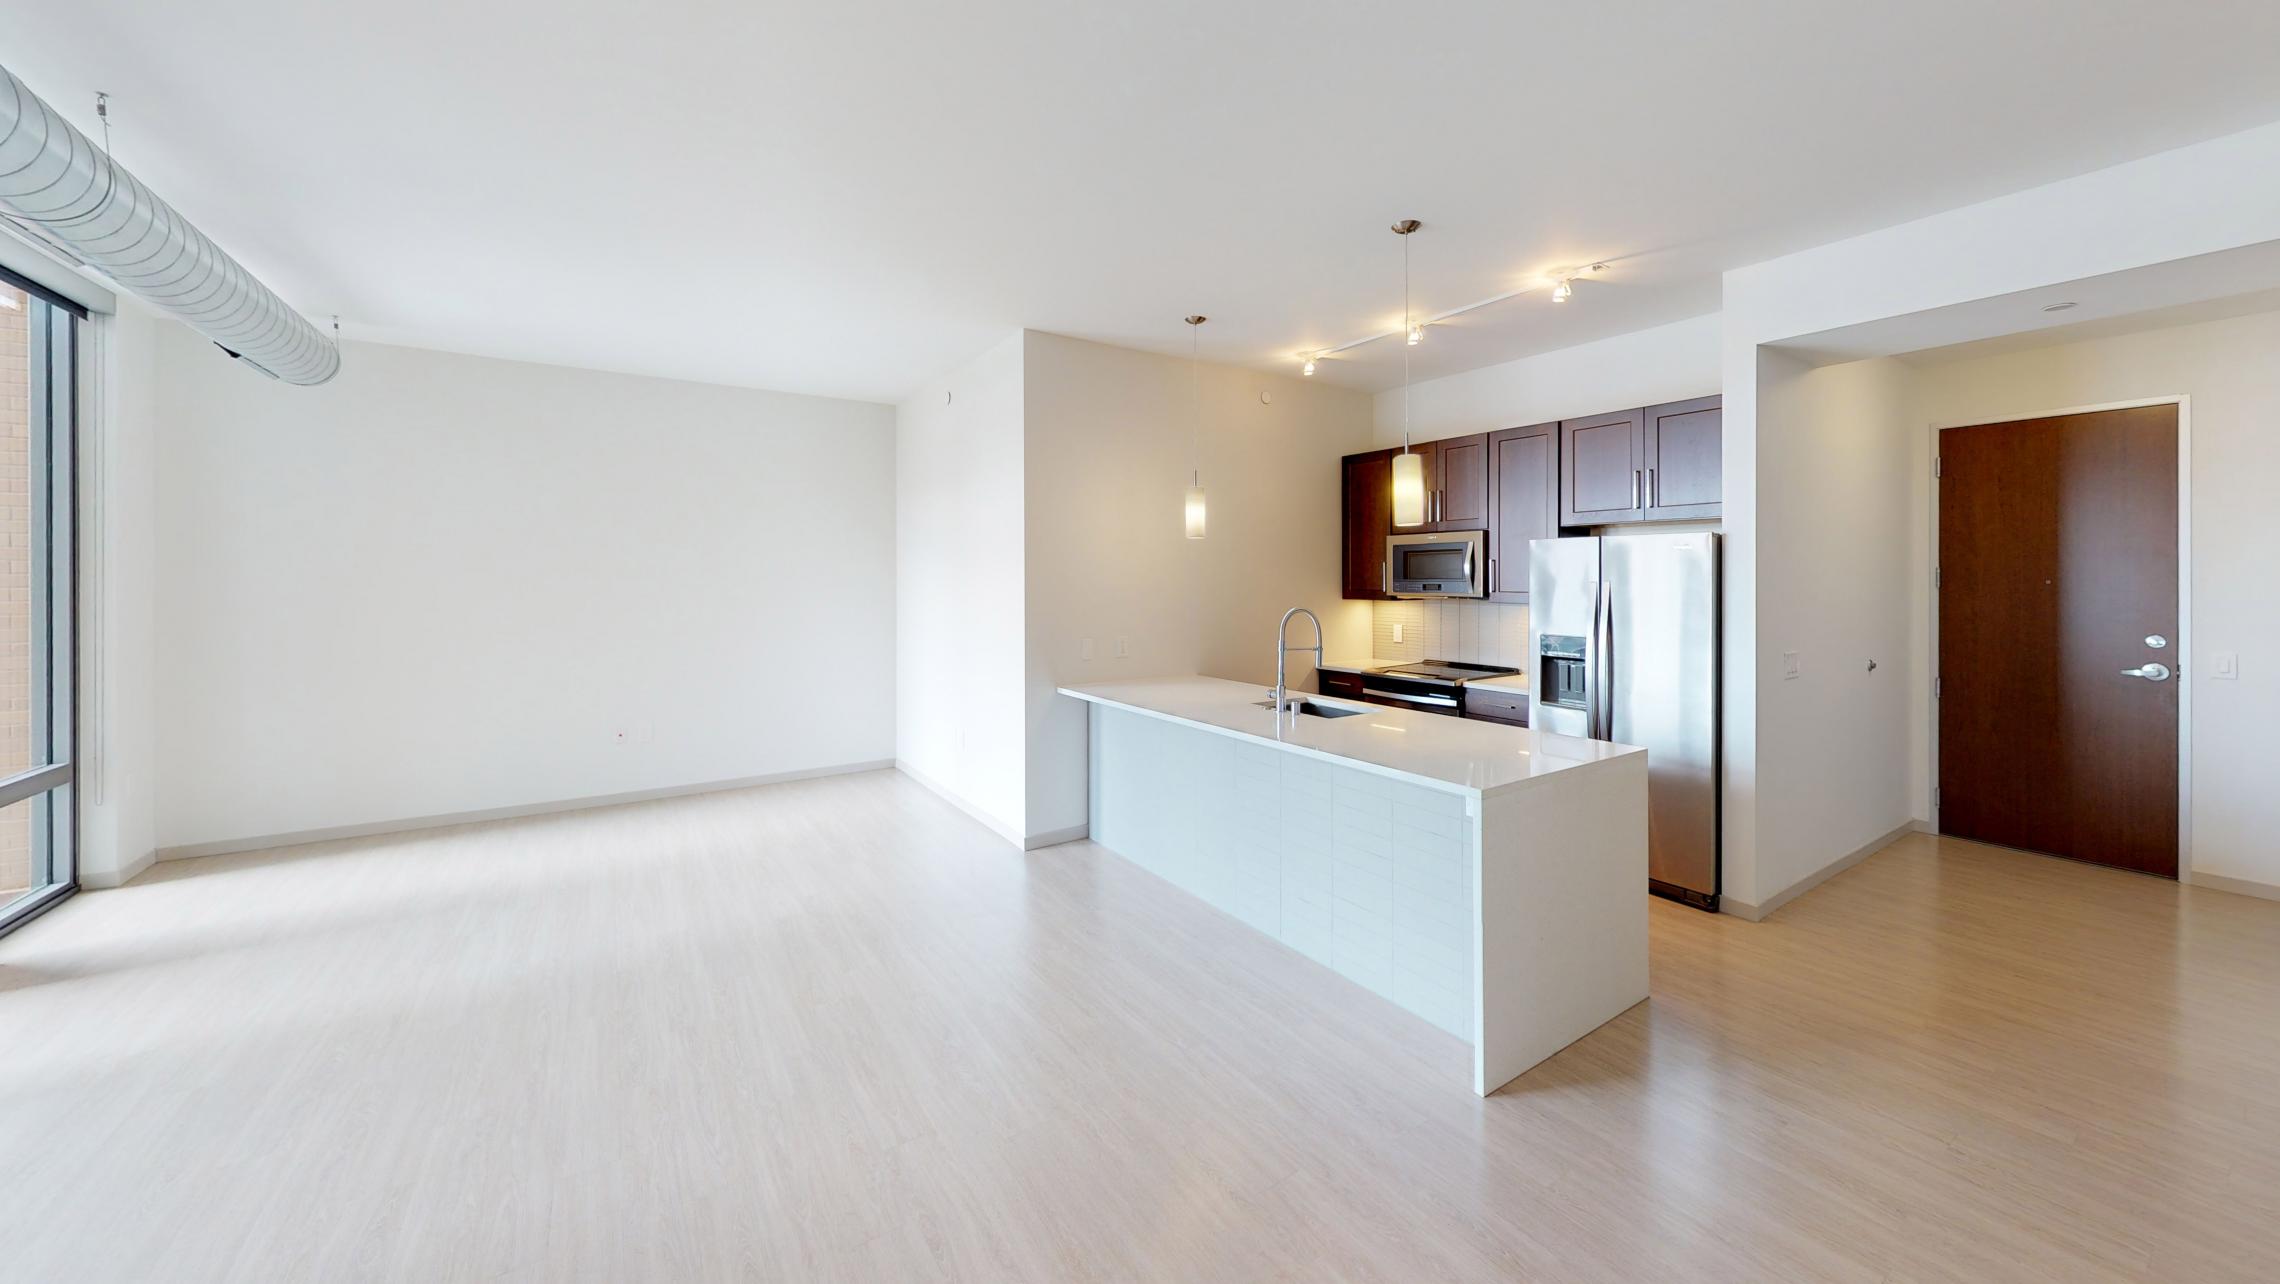 Pressman-Apartment-504-One-Bedroom-Balcony-City-View-Luxury-Downtown-Upscale-Modern-Downtown-Madison-Capitol-Square-Living-Room-Kitchen.jpg